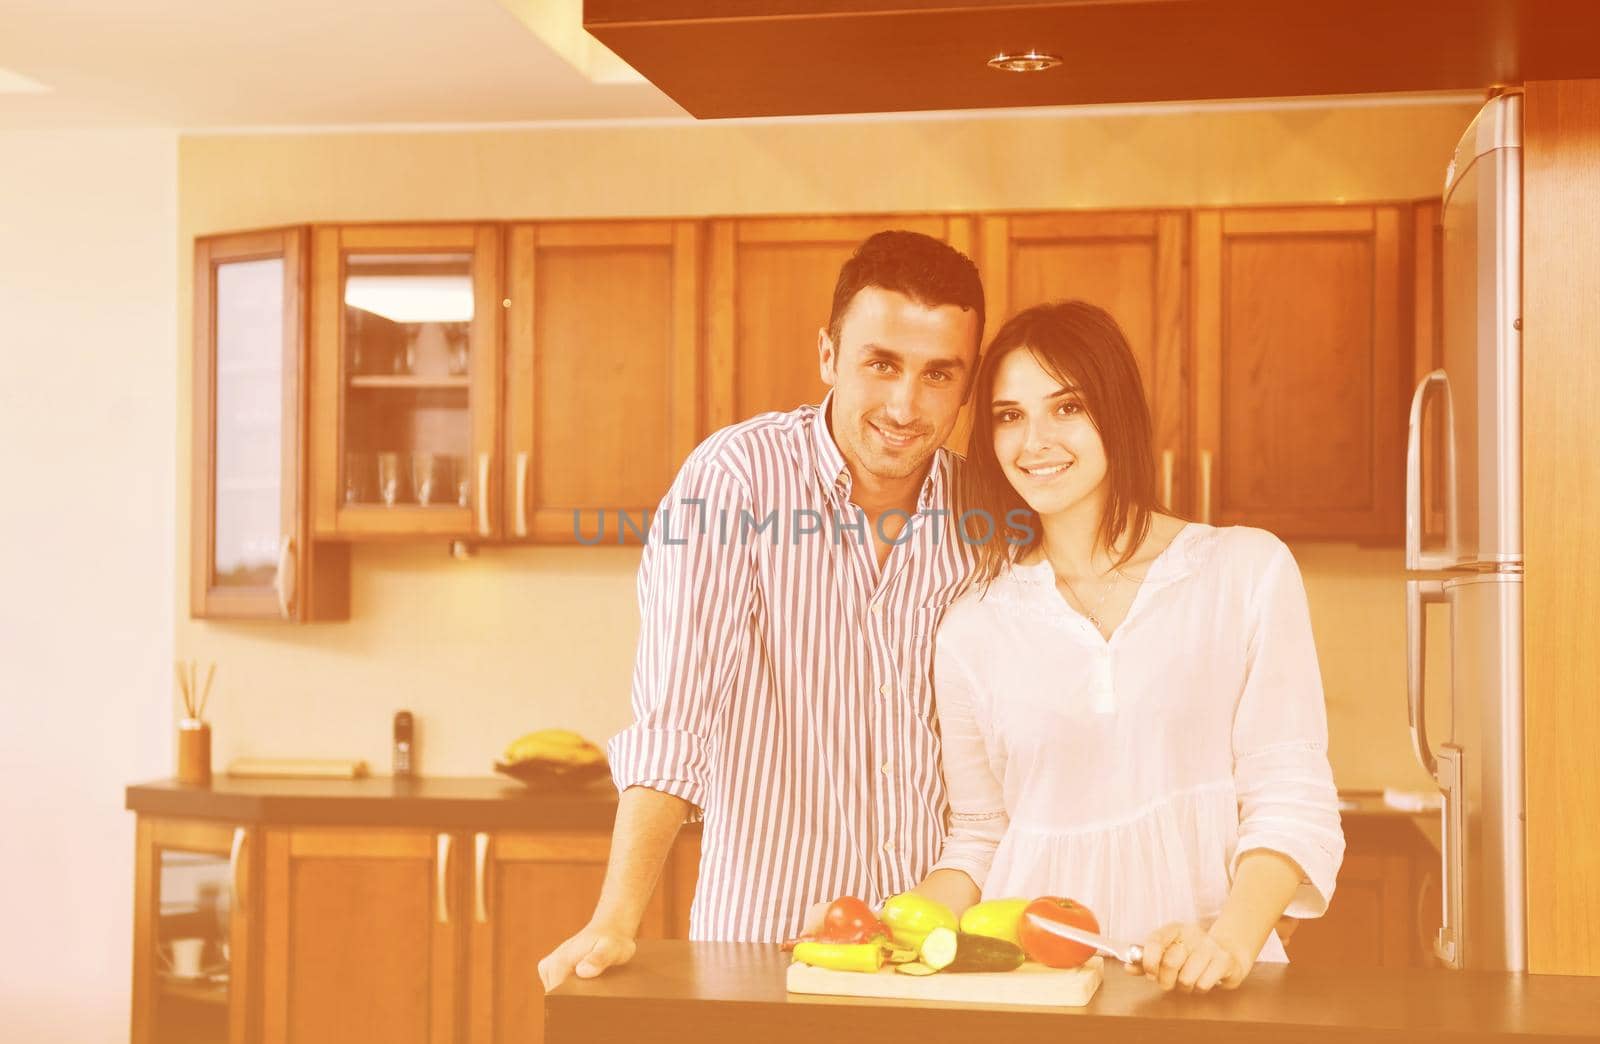 happy young couple have fun in modern wooden  kitchen indoor while preparing fresh food